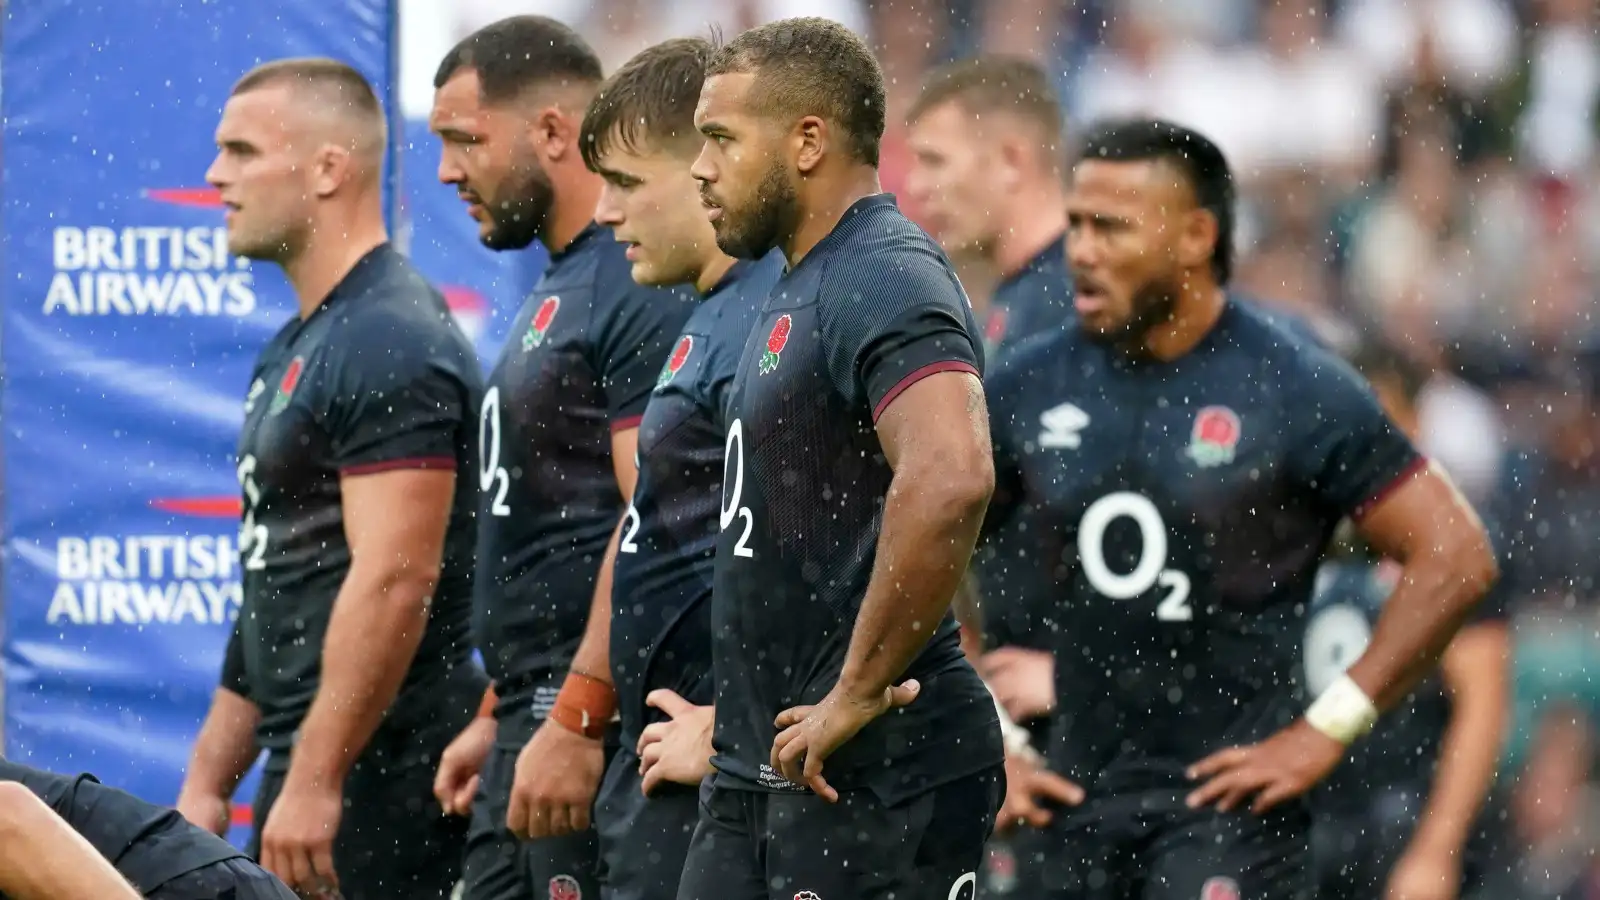 England players dejected after conceding try against Fiji in Rugby World Cup warm-up.